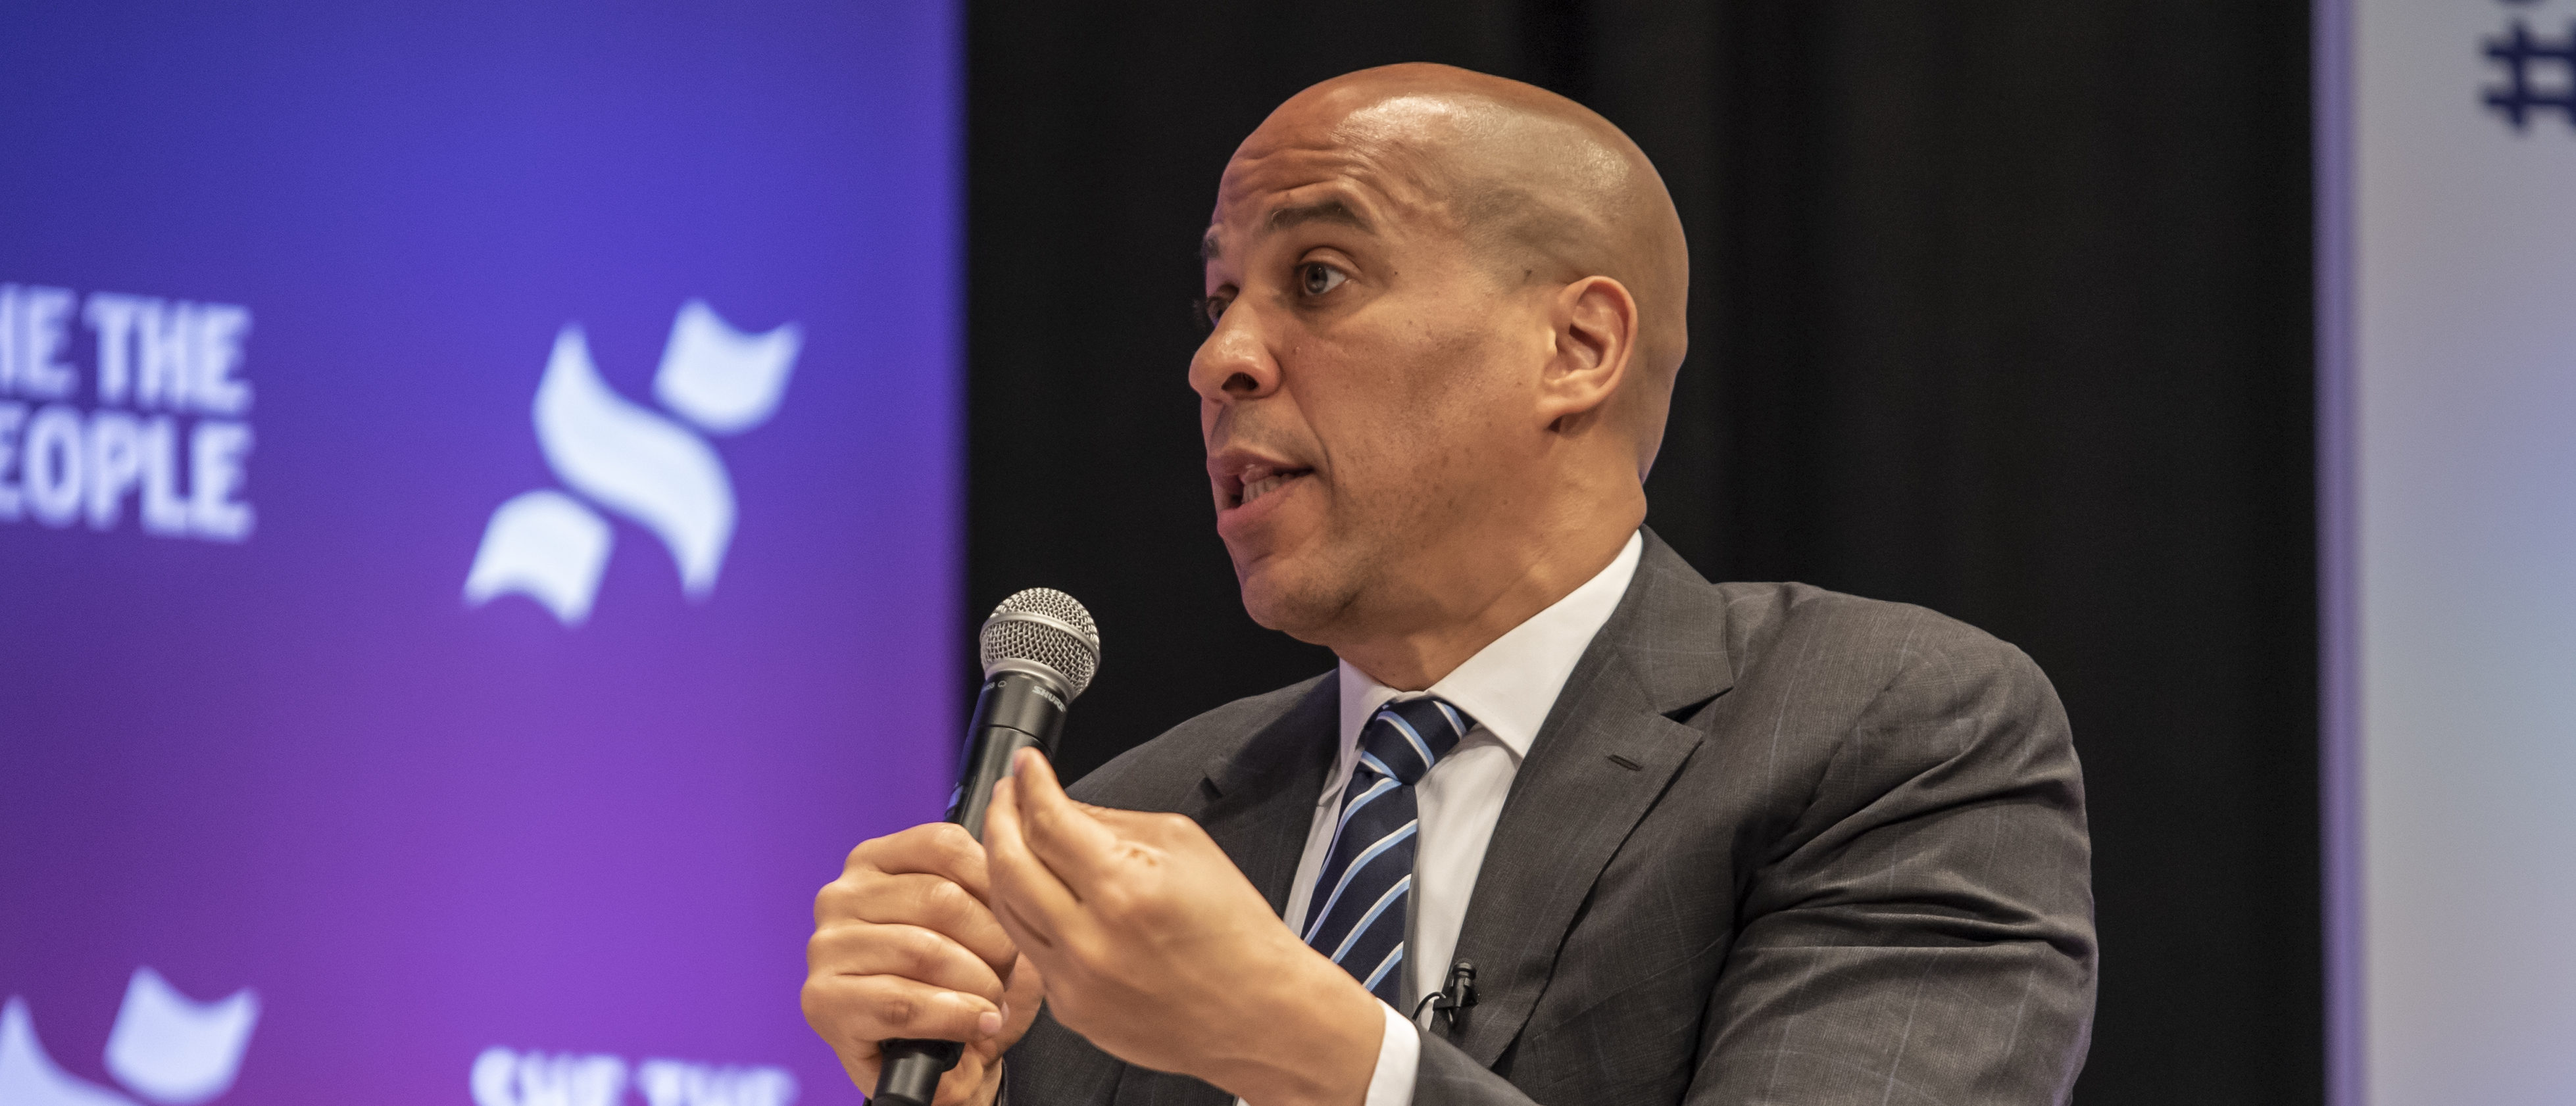 Democratic presidential candidate Sen. Cory Booker (D-NJ) speaks to a crowd at the She The People Presidential Forum at Texas Southern University on April 24, 2019 in Houston, Texas. (Photo by Sergio Flores/Getty Images)